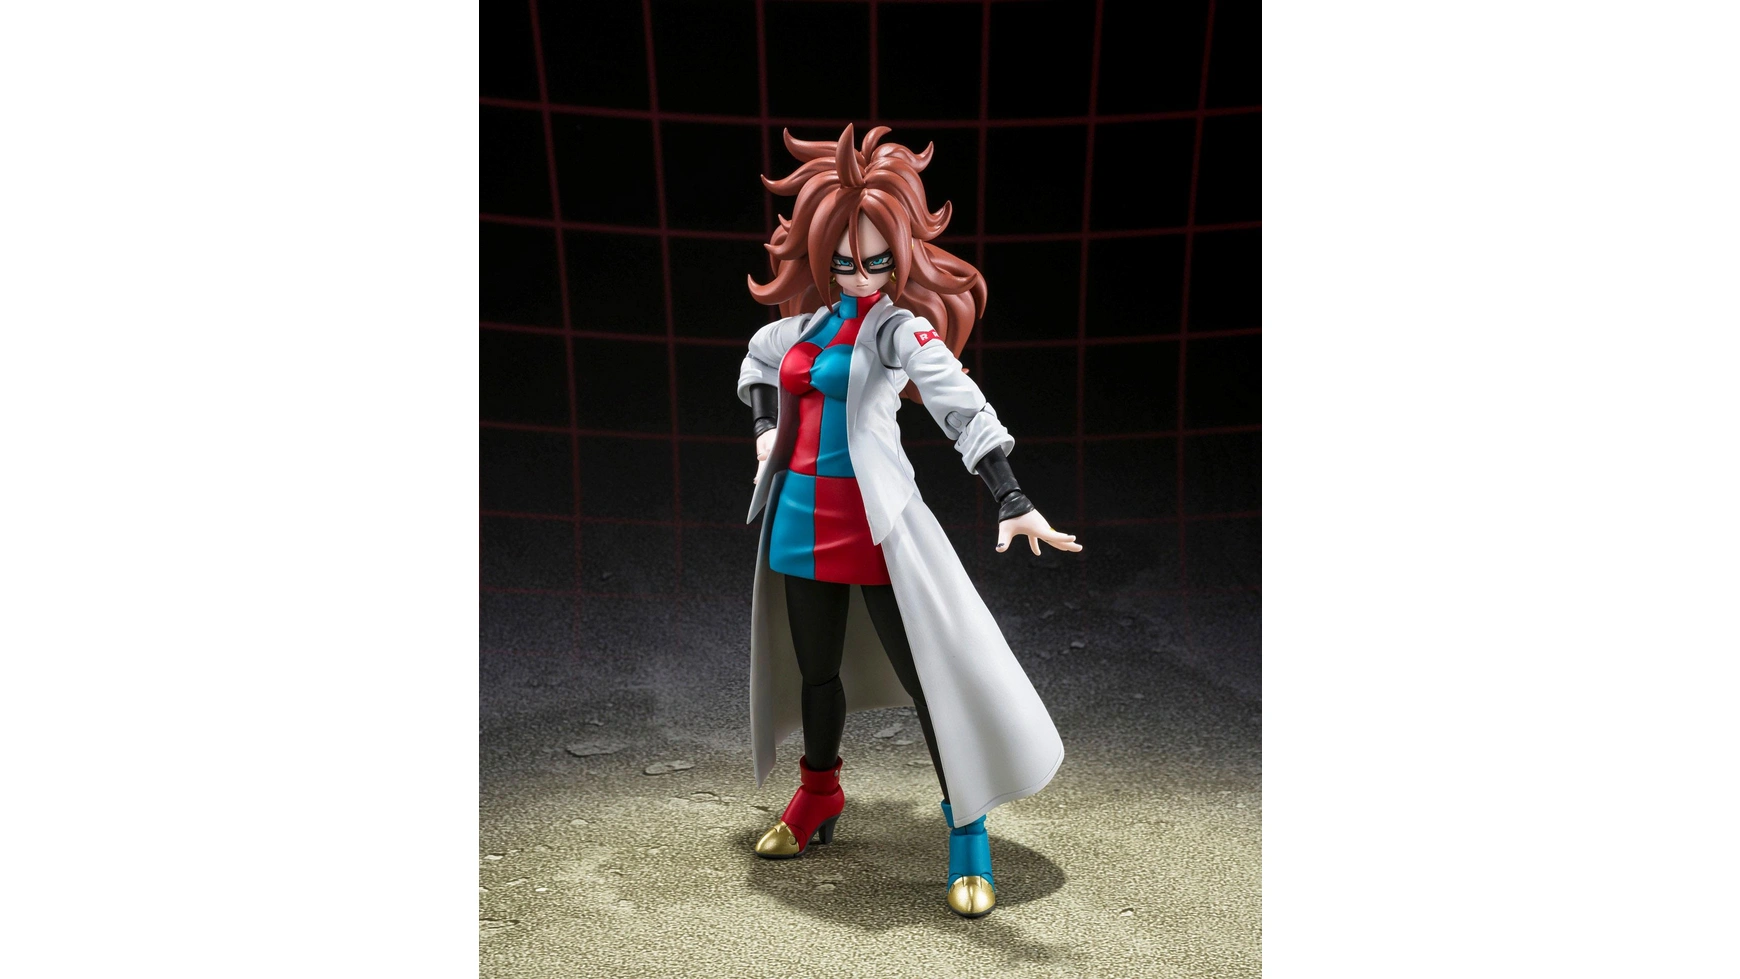 Dragon Ball FighterZ СХ Фигурка Figuarts Android 21 (лабораторный халат), 15 см, аниме-фигурка dragon ball fighter z fighterz edition [pc цифровая версия] цифровая версия